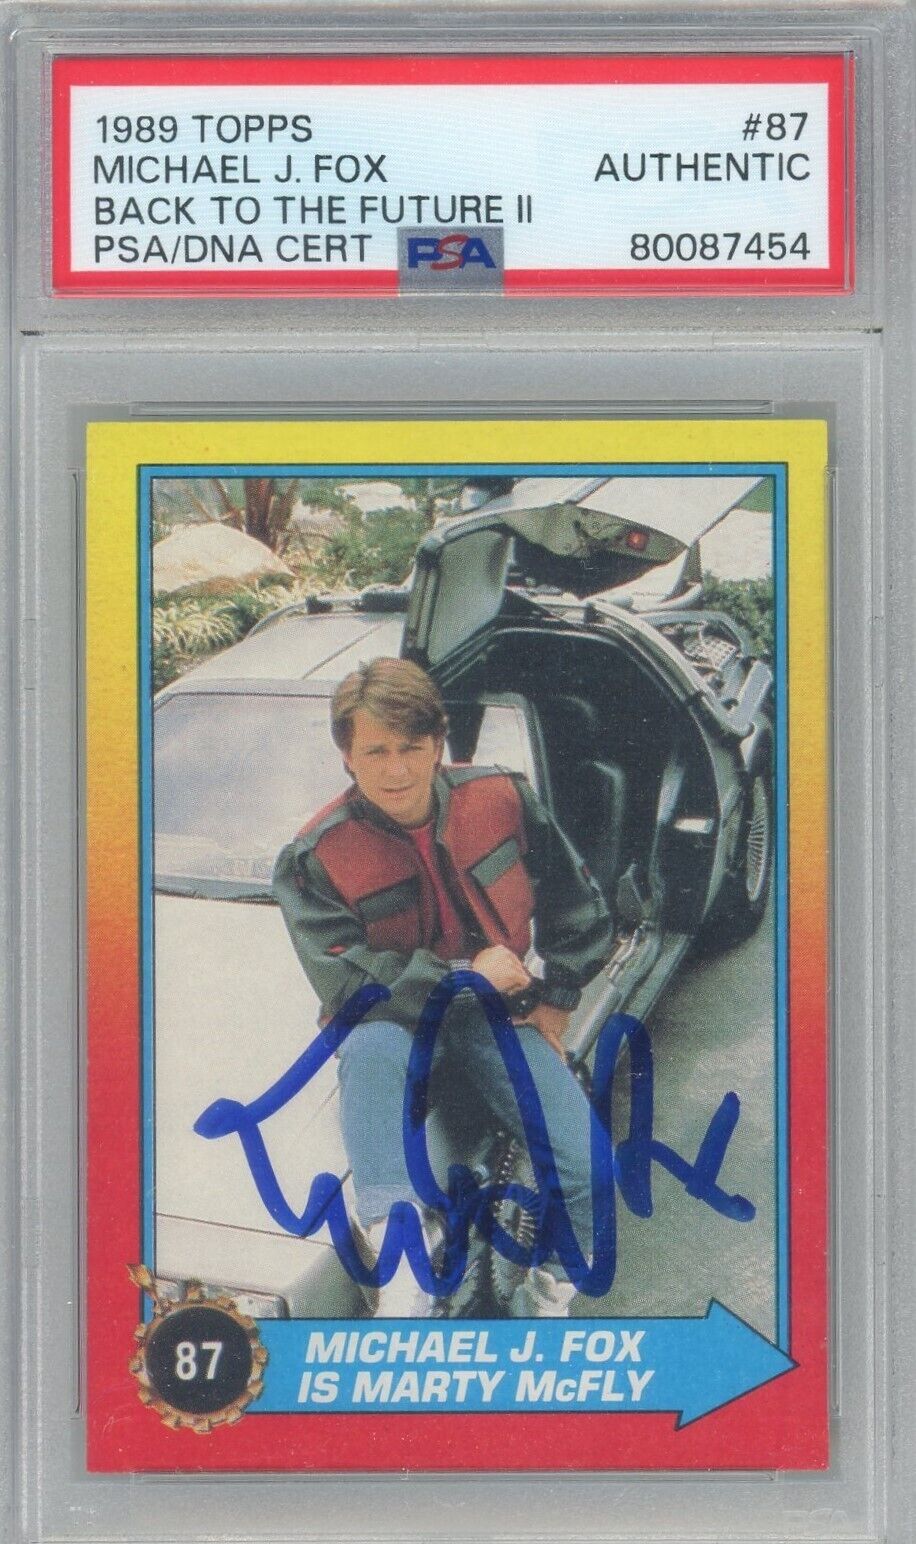 Michael J Fox 1989 Topps Back To The Future II #87 Rookie Card Autograph PSA/DNA